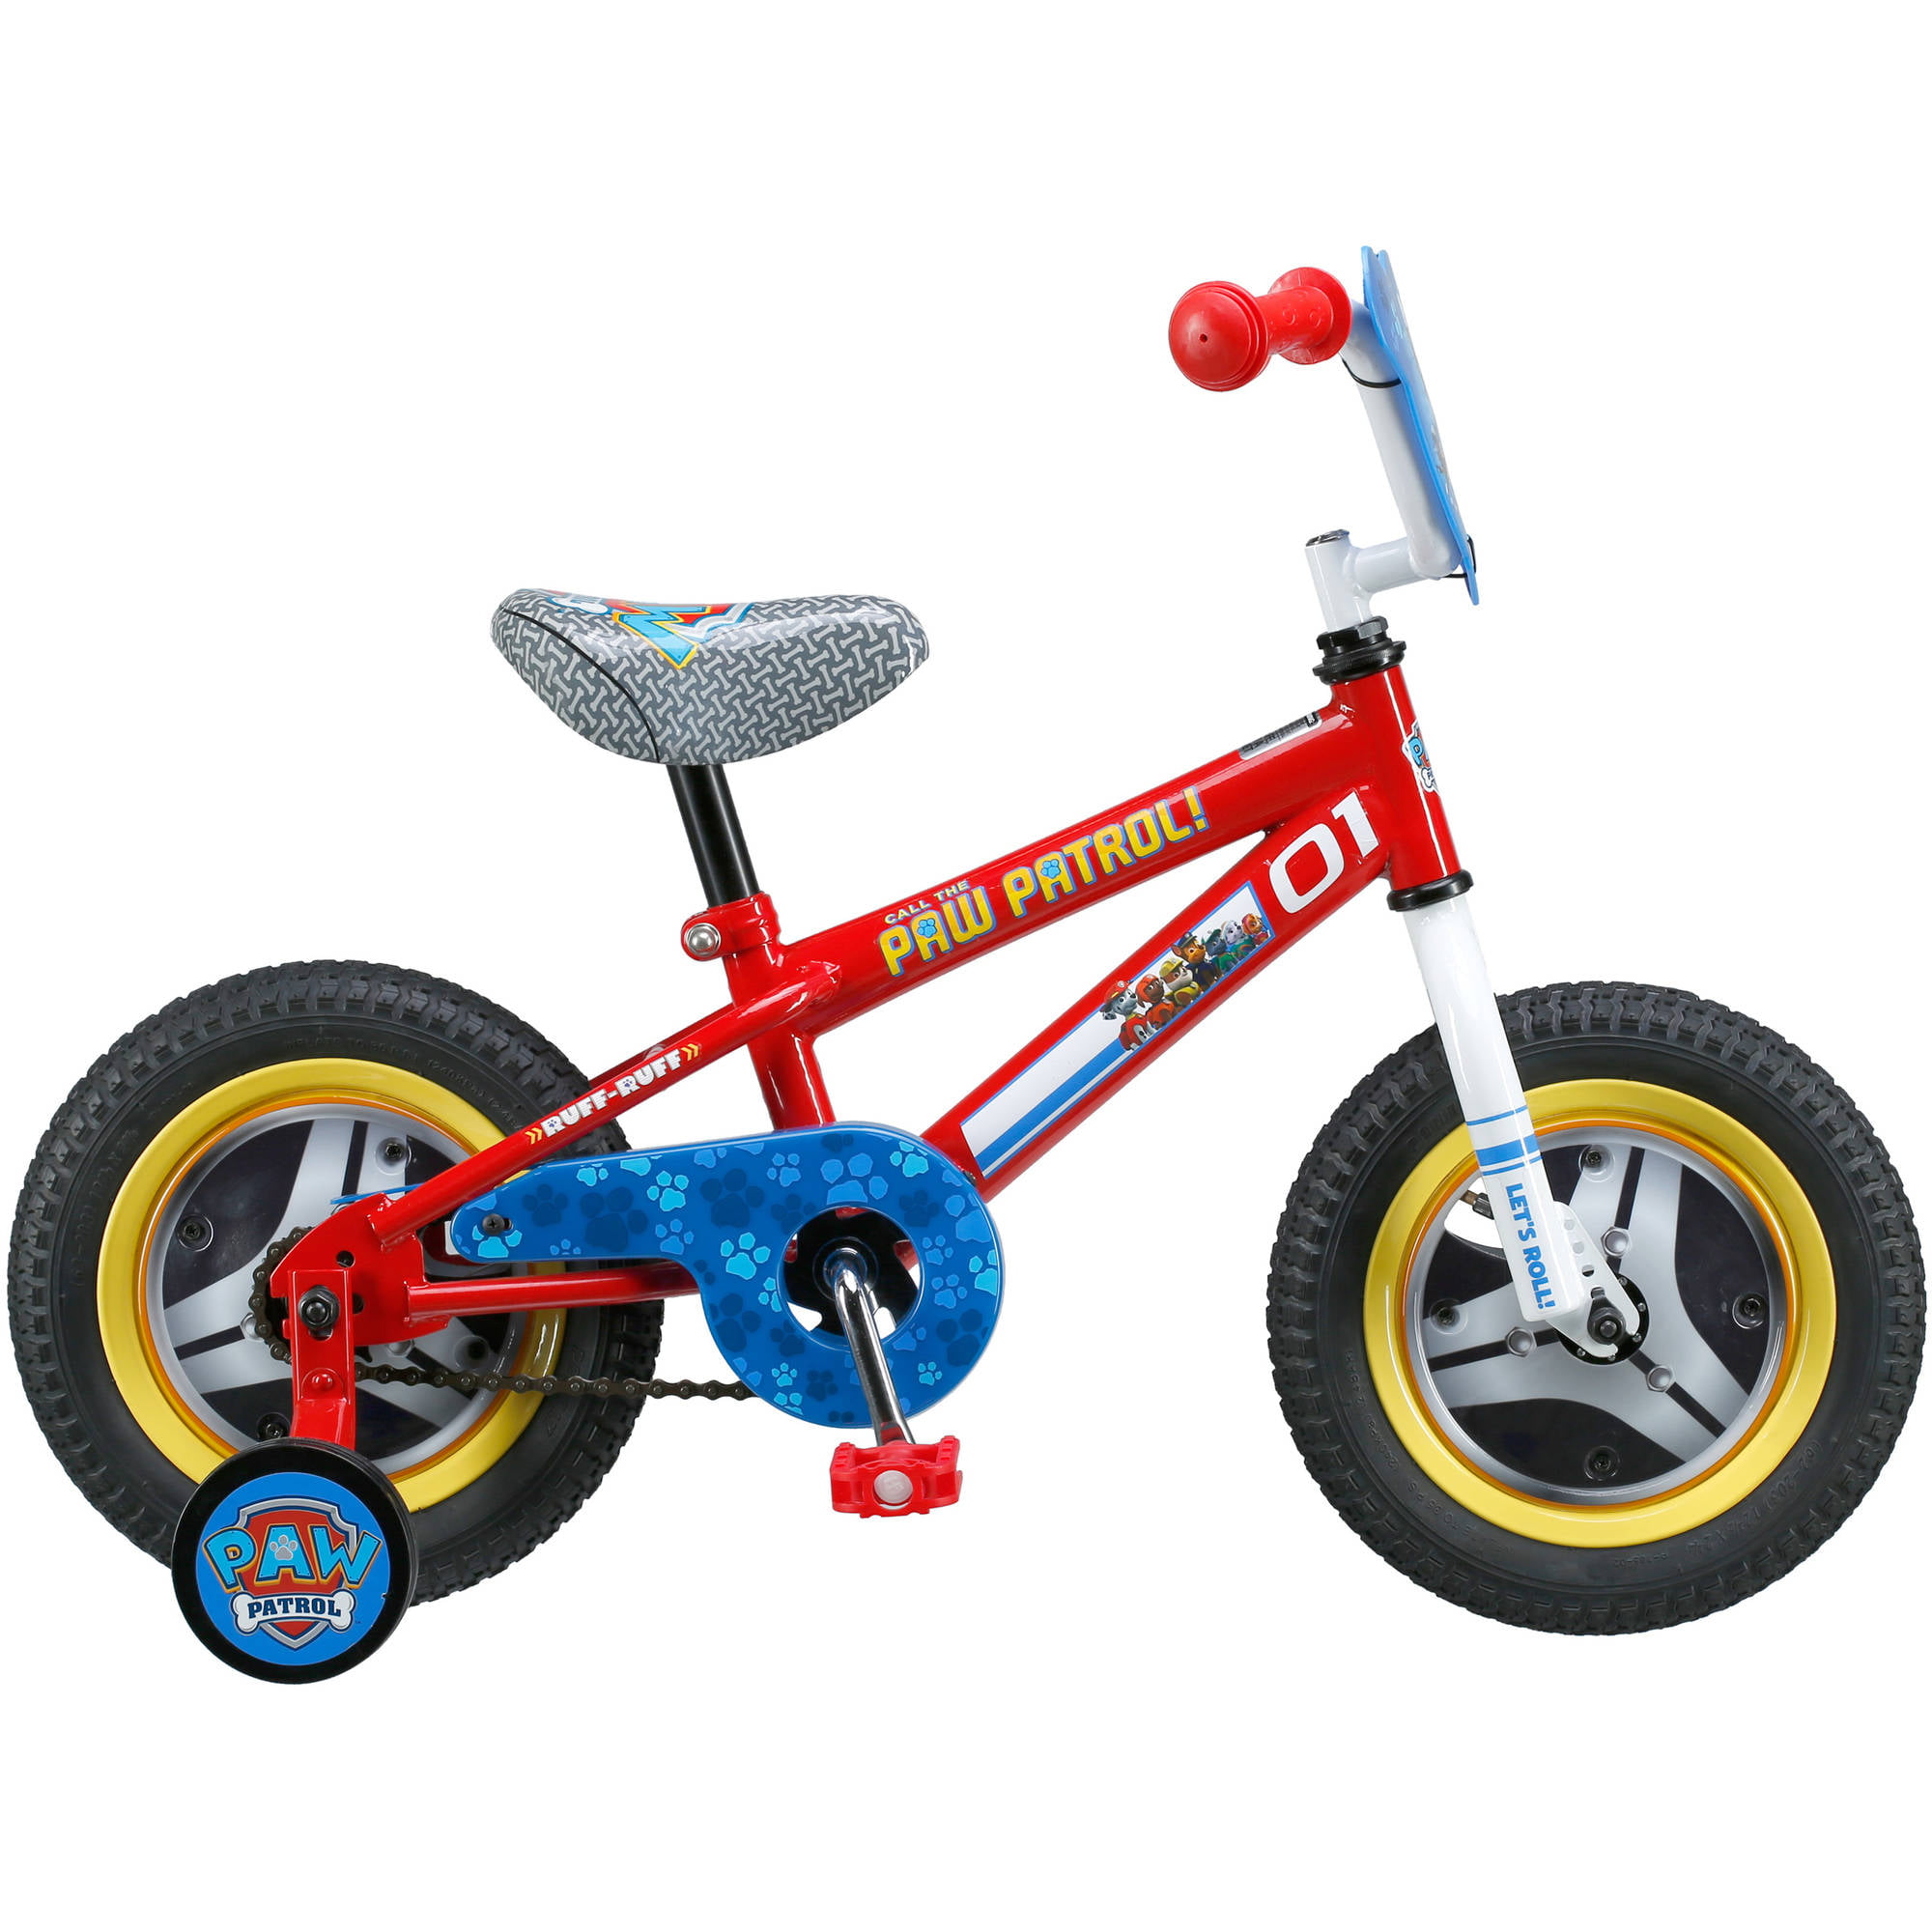 Featuring Chase on a Silver Steel Frame Nickelodeon Paw Patrol Bicycle for Kids 